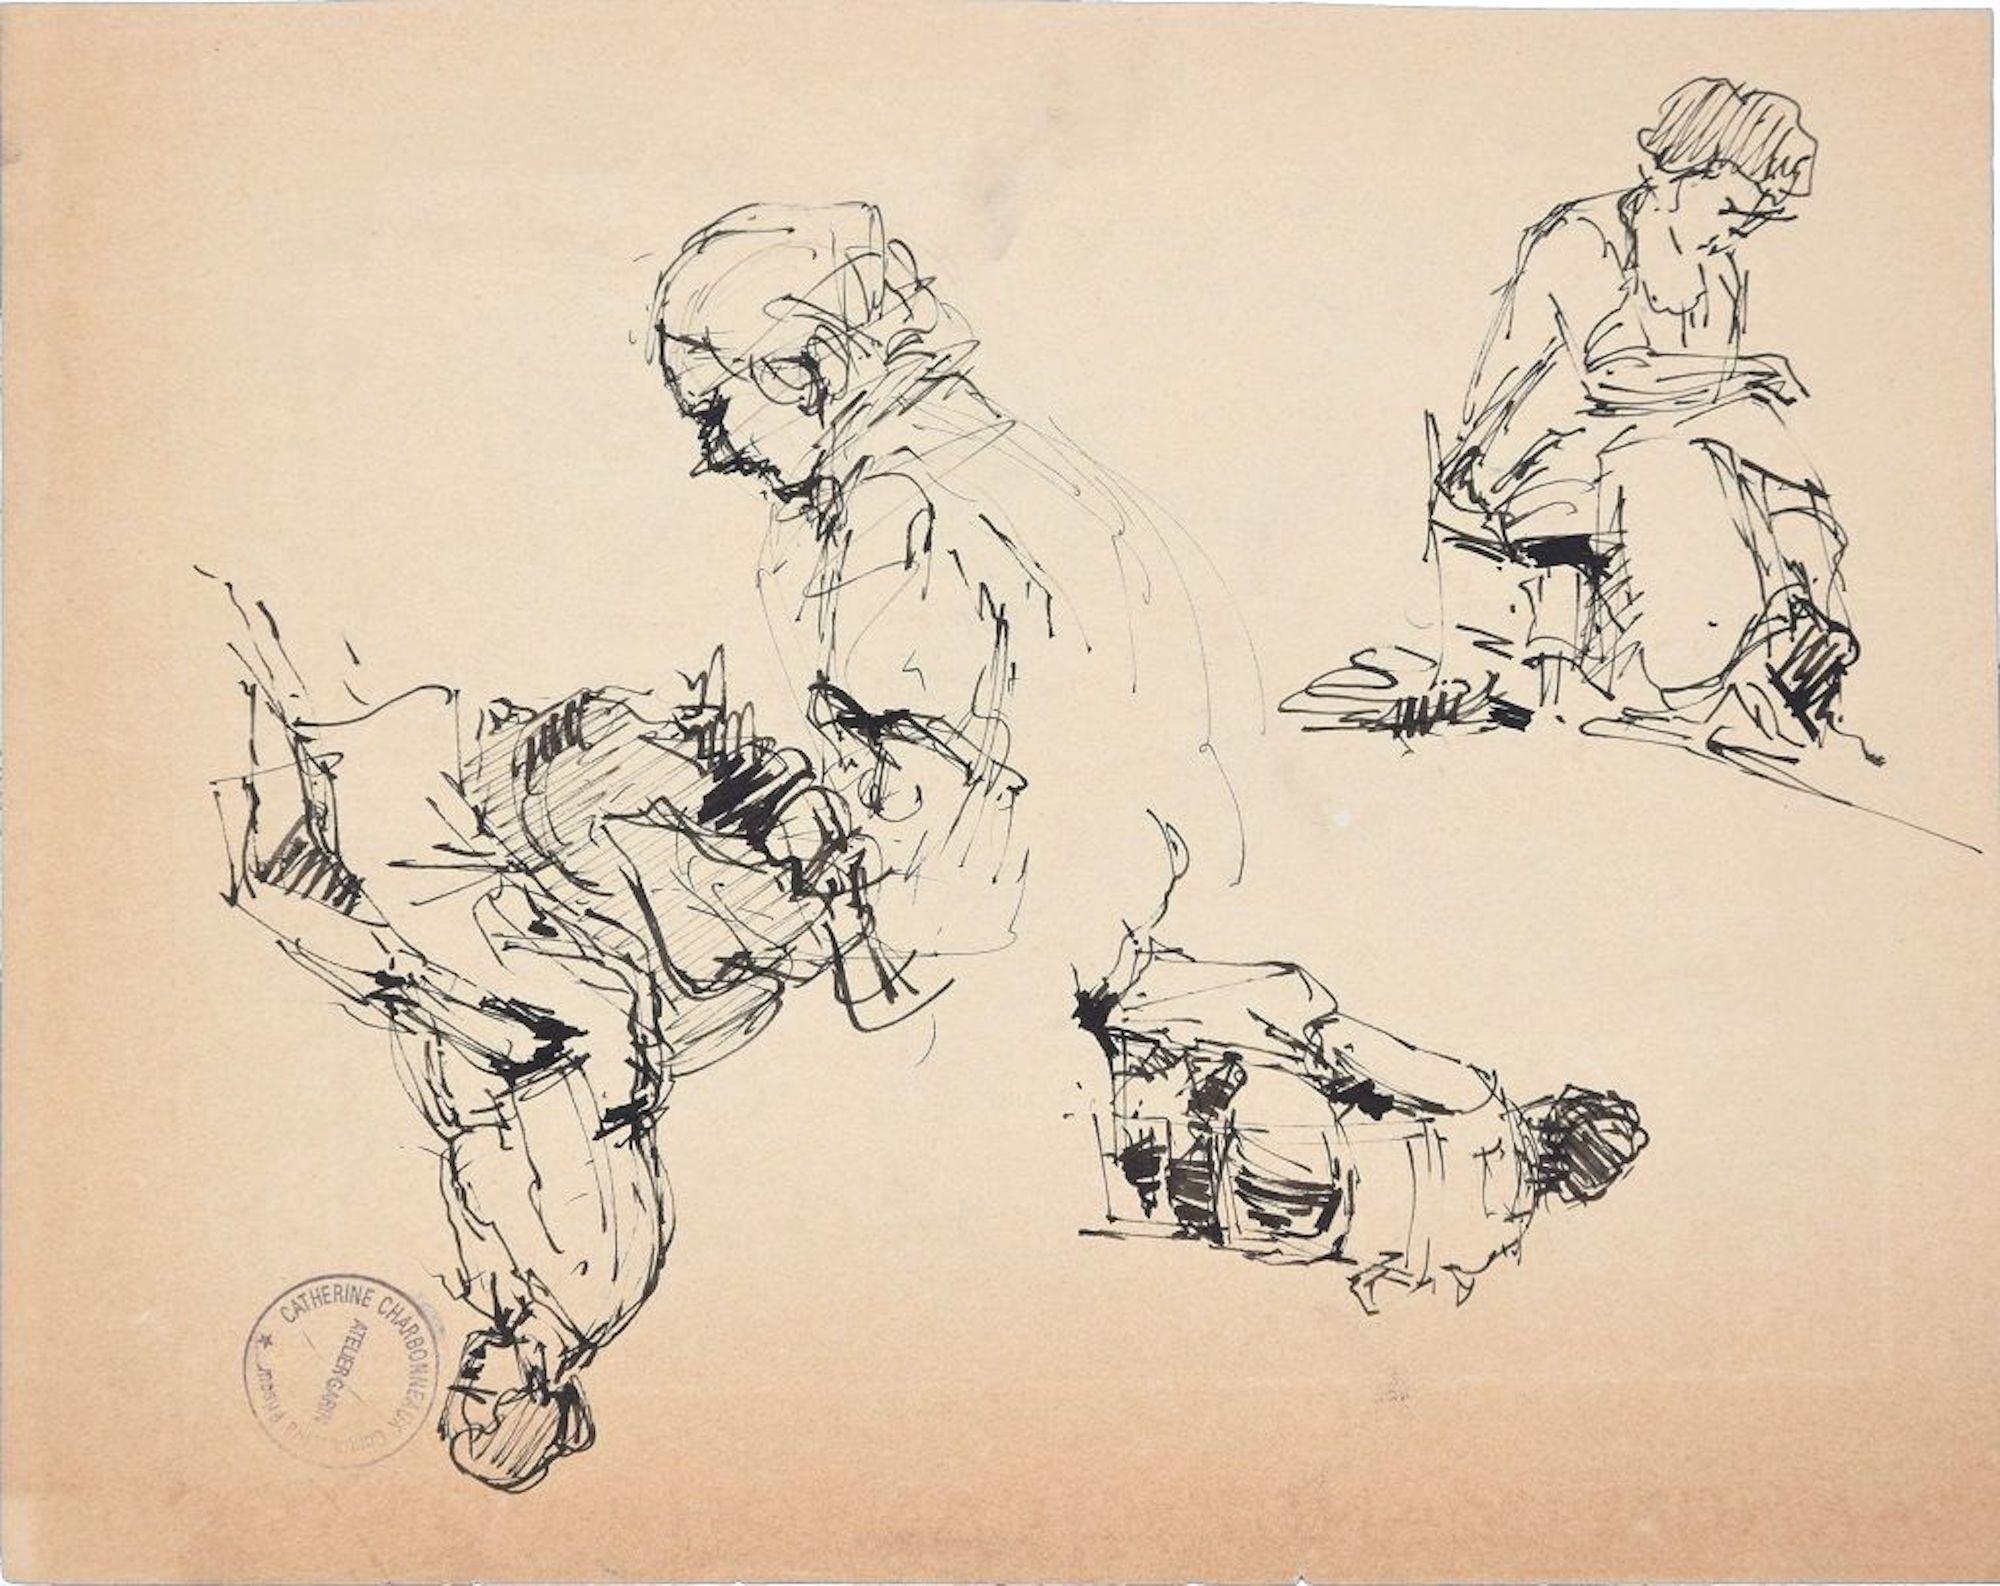 Sketches is an original pen drawing on ivory-colored paper, realized by the French artist Paul Garin (Nice, 1898-1963) in the 1950s. 

Black ink stamp on the lower-left corner: "Catherine Charbonneux Commissaire Priseur - Atelier Garin".

This